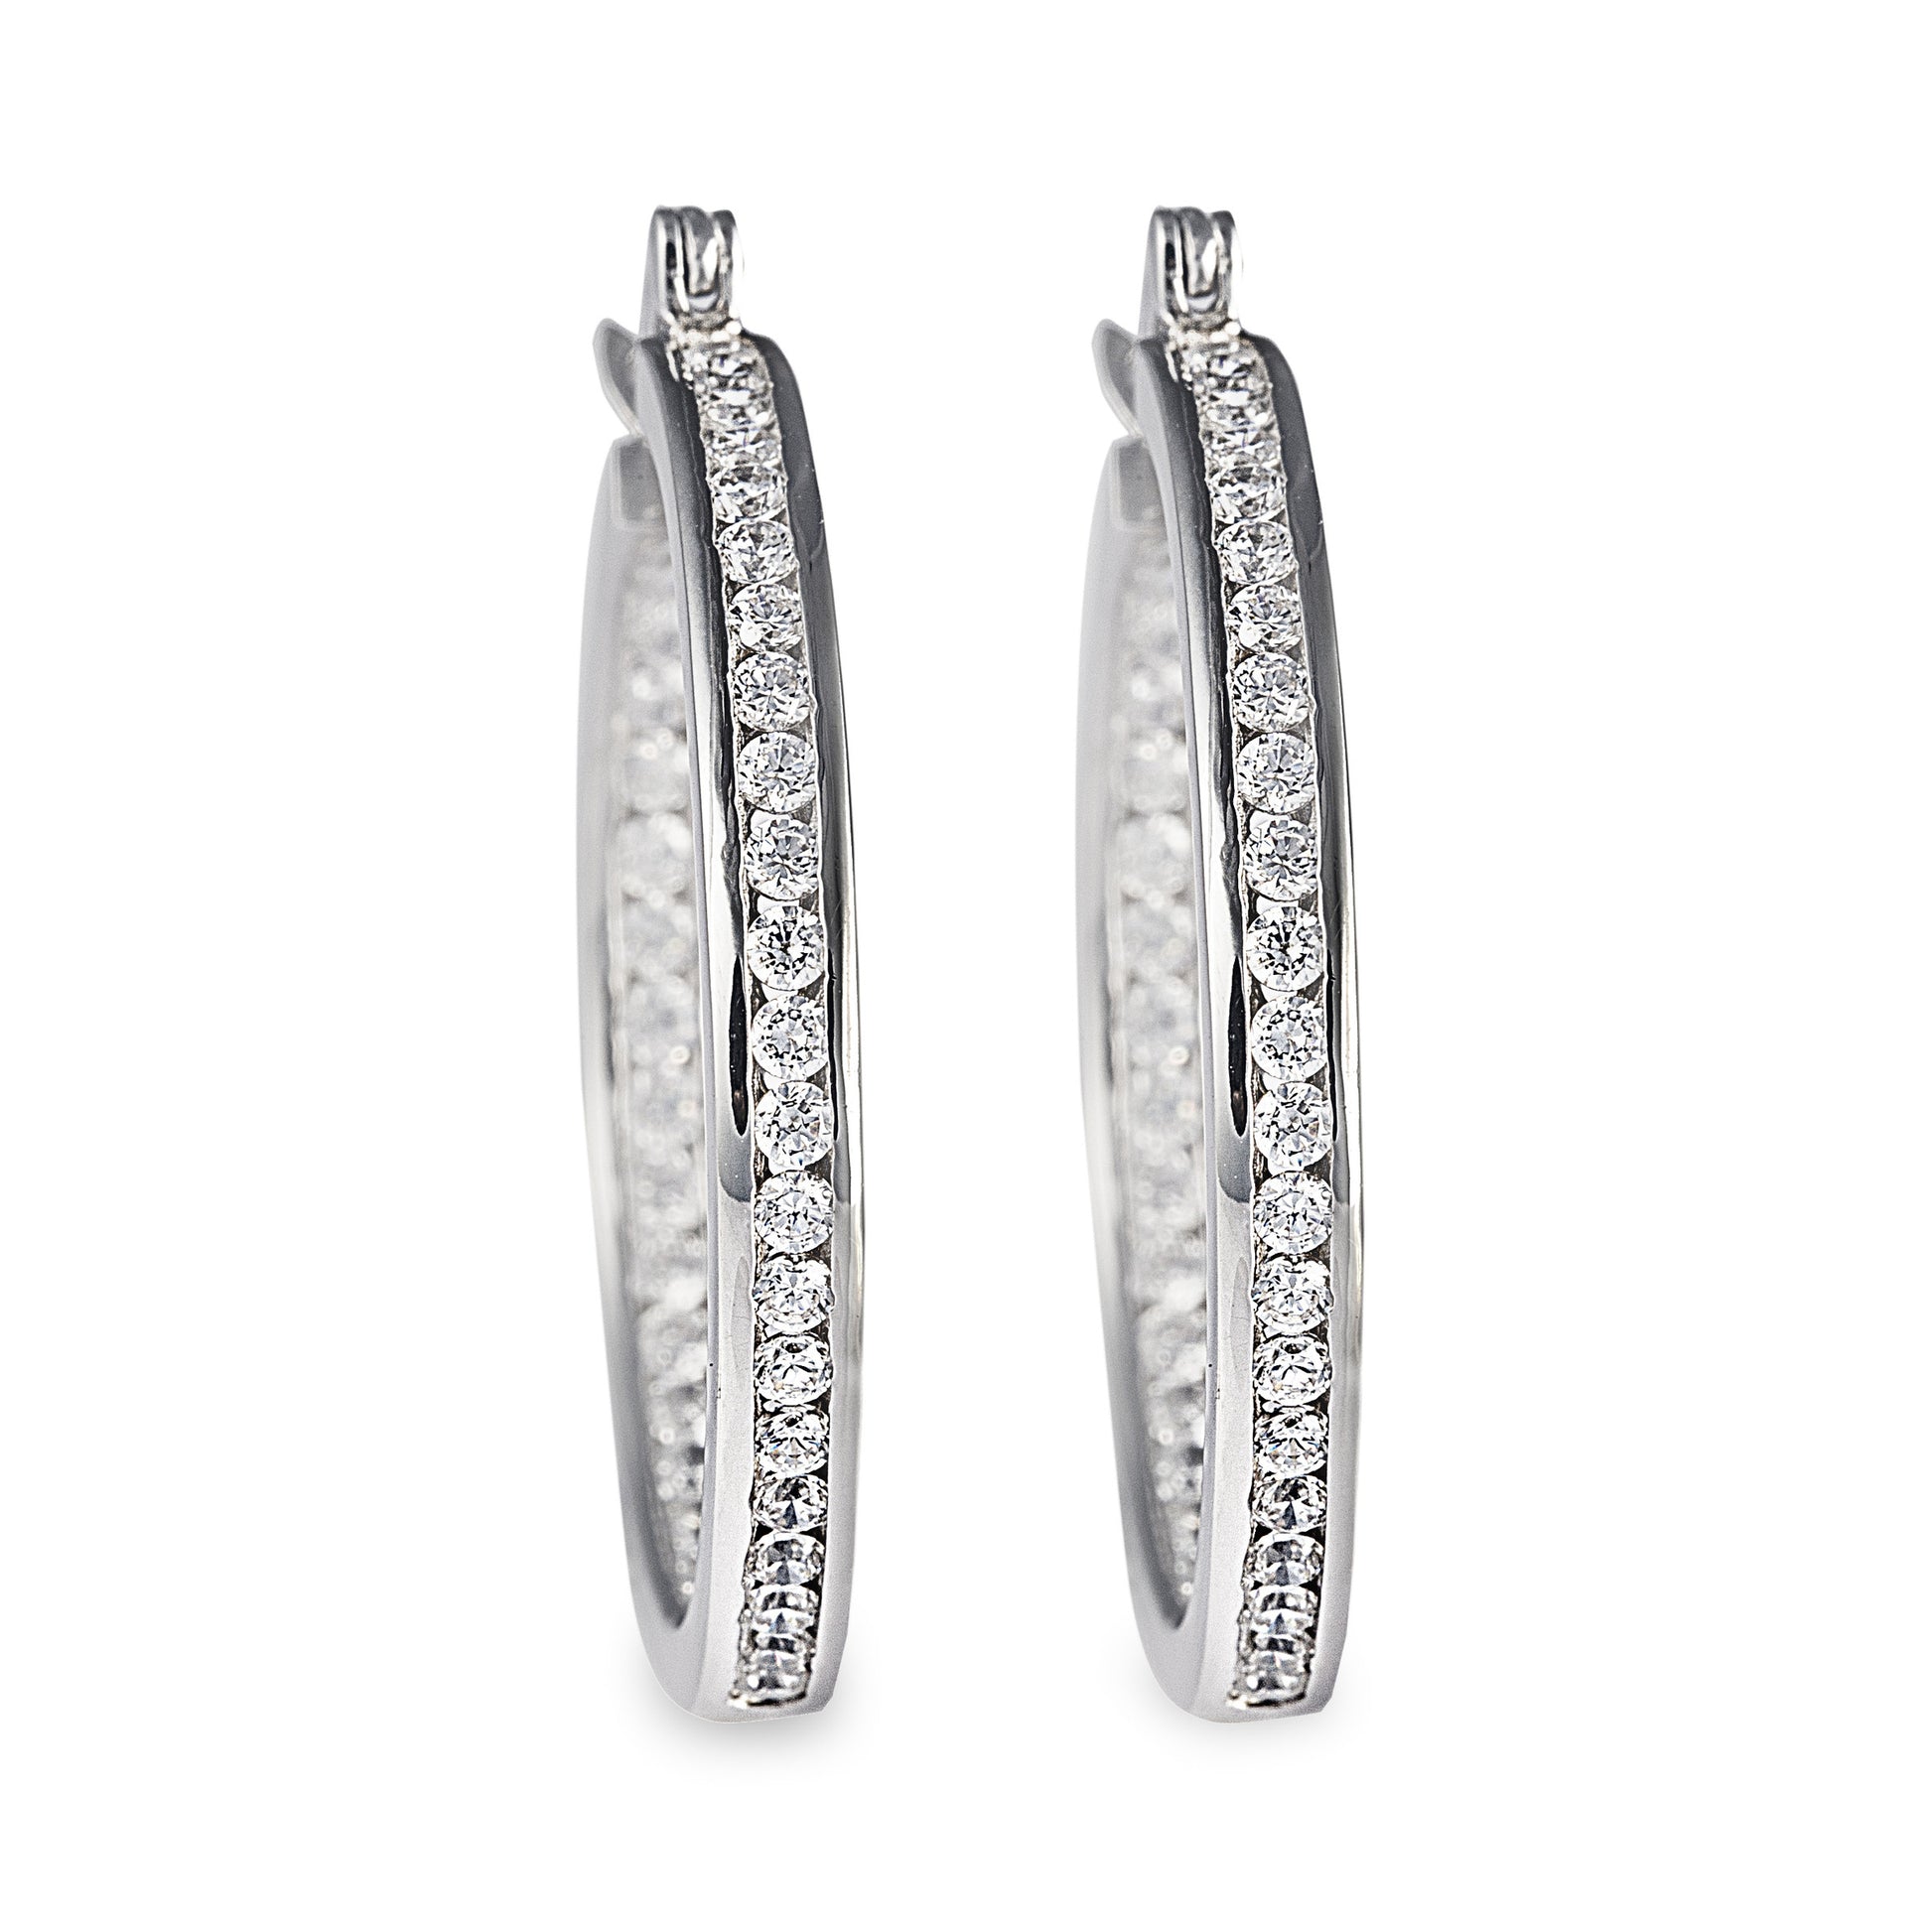 Large Chanelle Hoop Earrings in 925 Sterling Silver with Cubic Zirconia Stones. Worldwide shipping. Affordable luxury jewellery by Bellagio & Co.